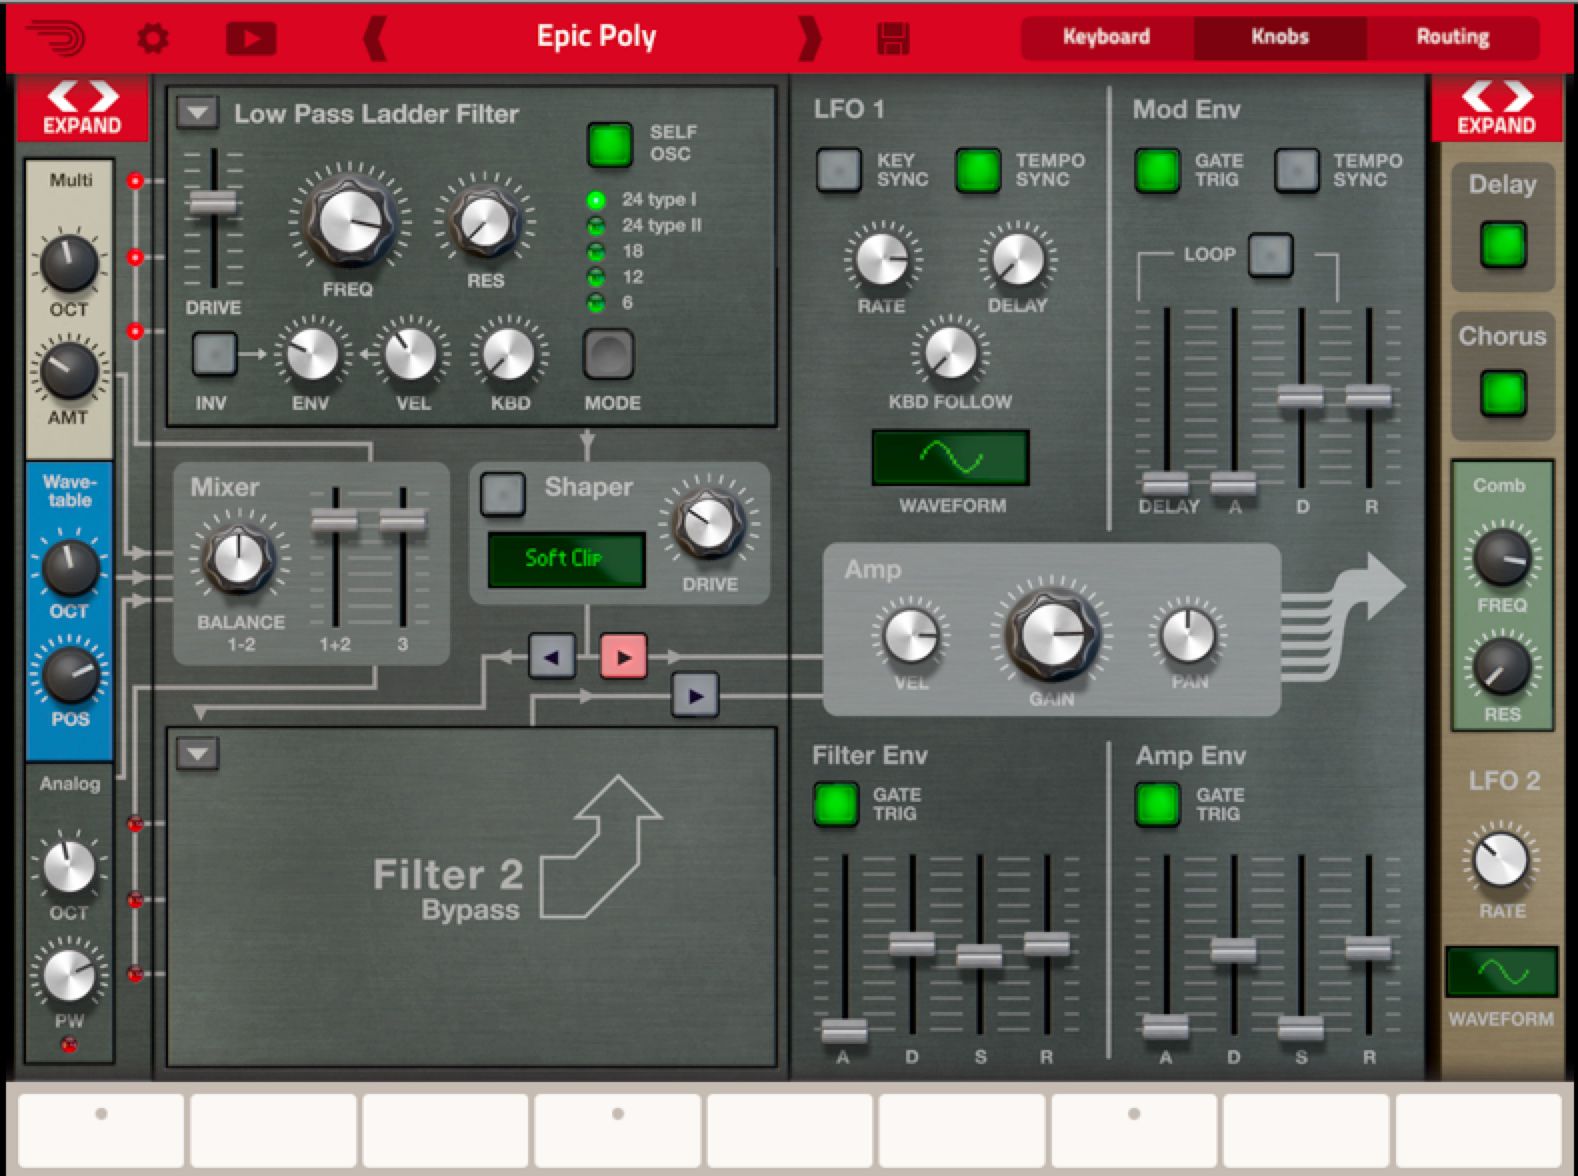 Thor for iPad: The knobs sections